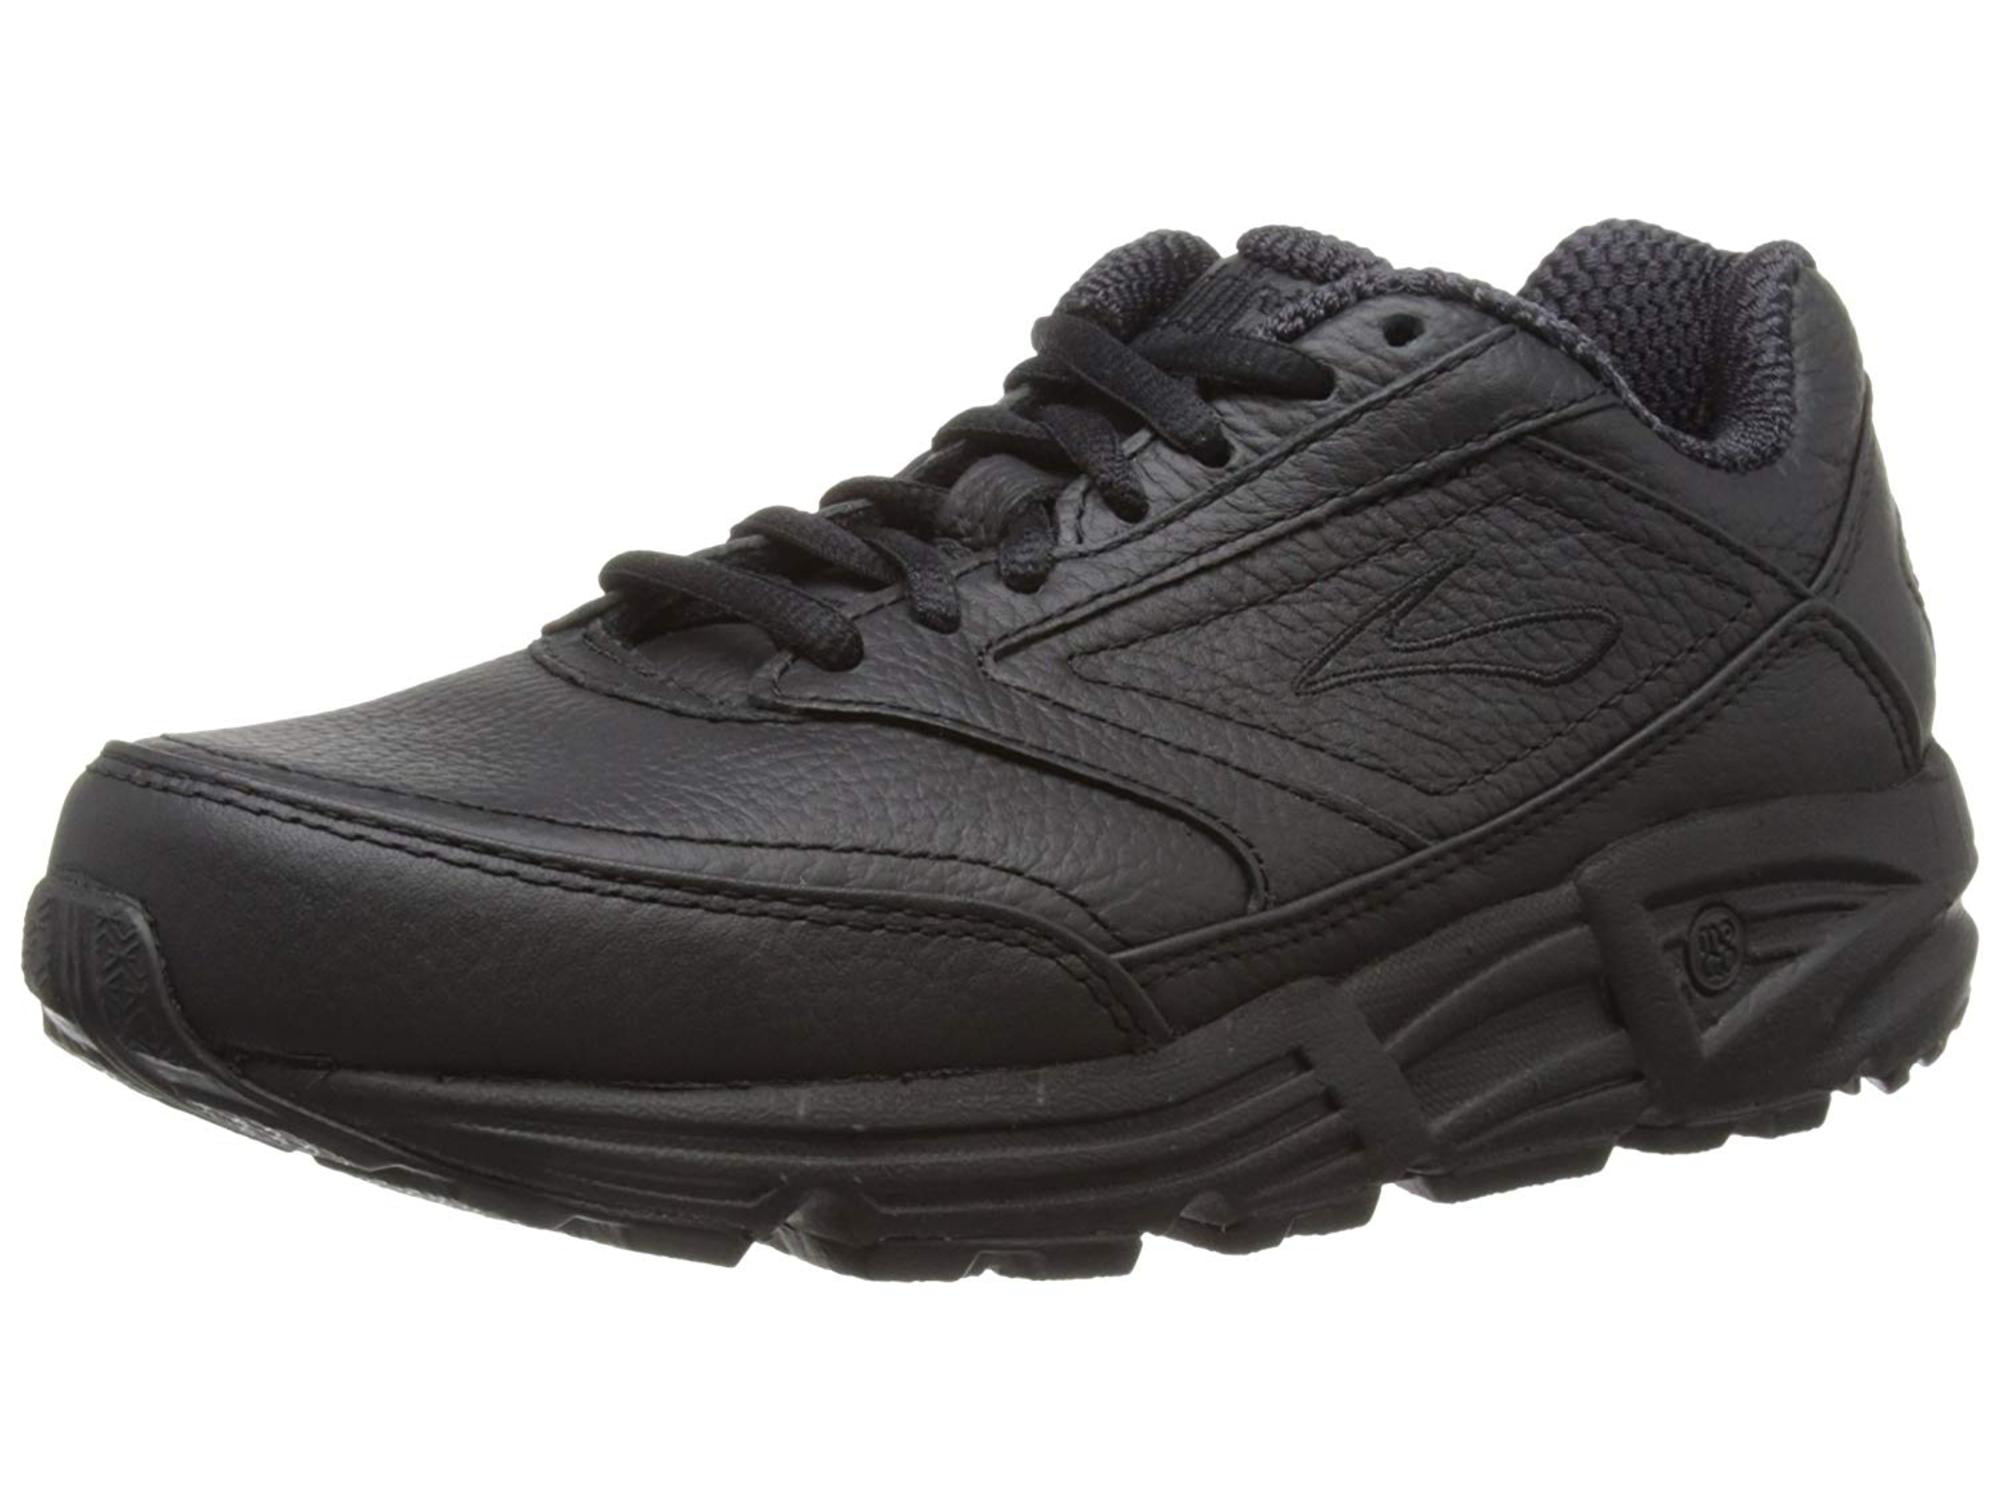 where to buy brooks addiction walker shoes near me